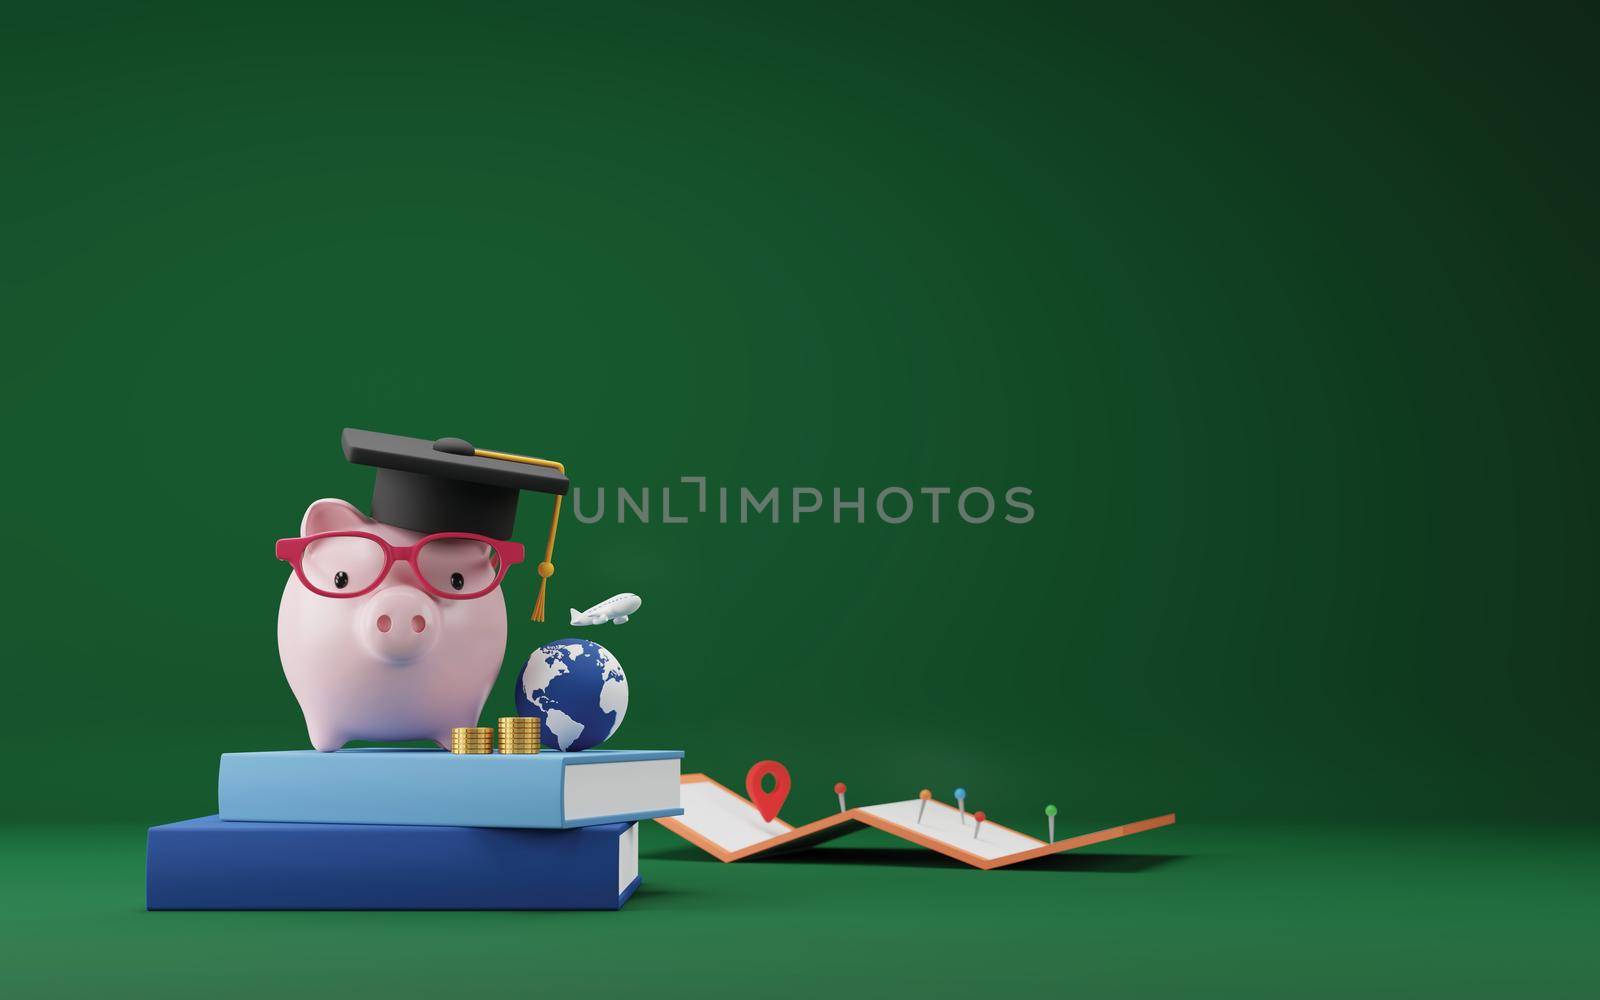 Investment education and scholarships concept design of piggy bank with graduation hat on book 3D render